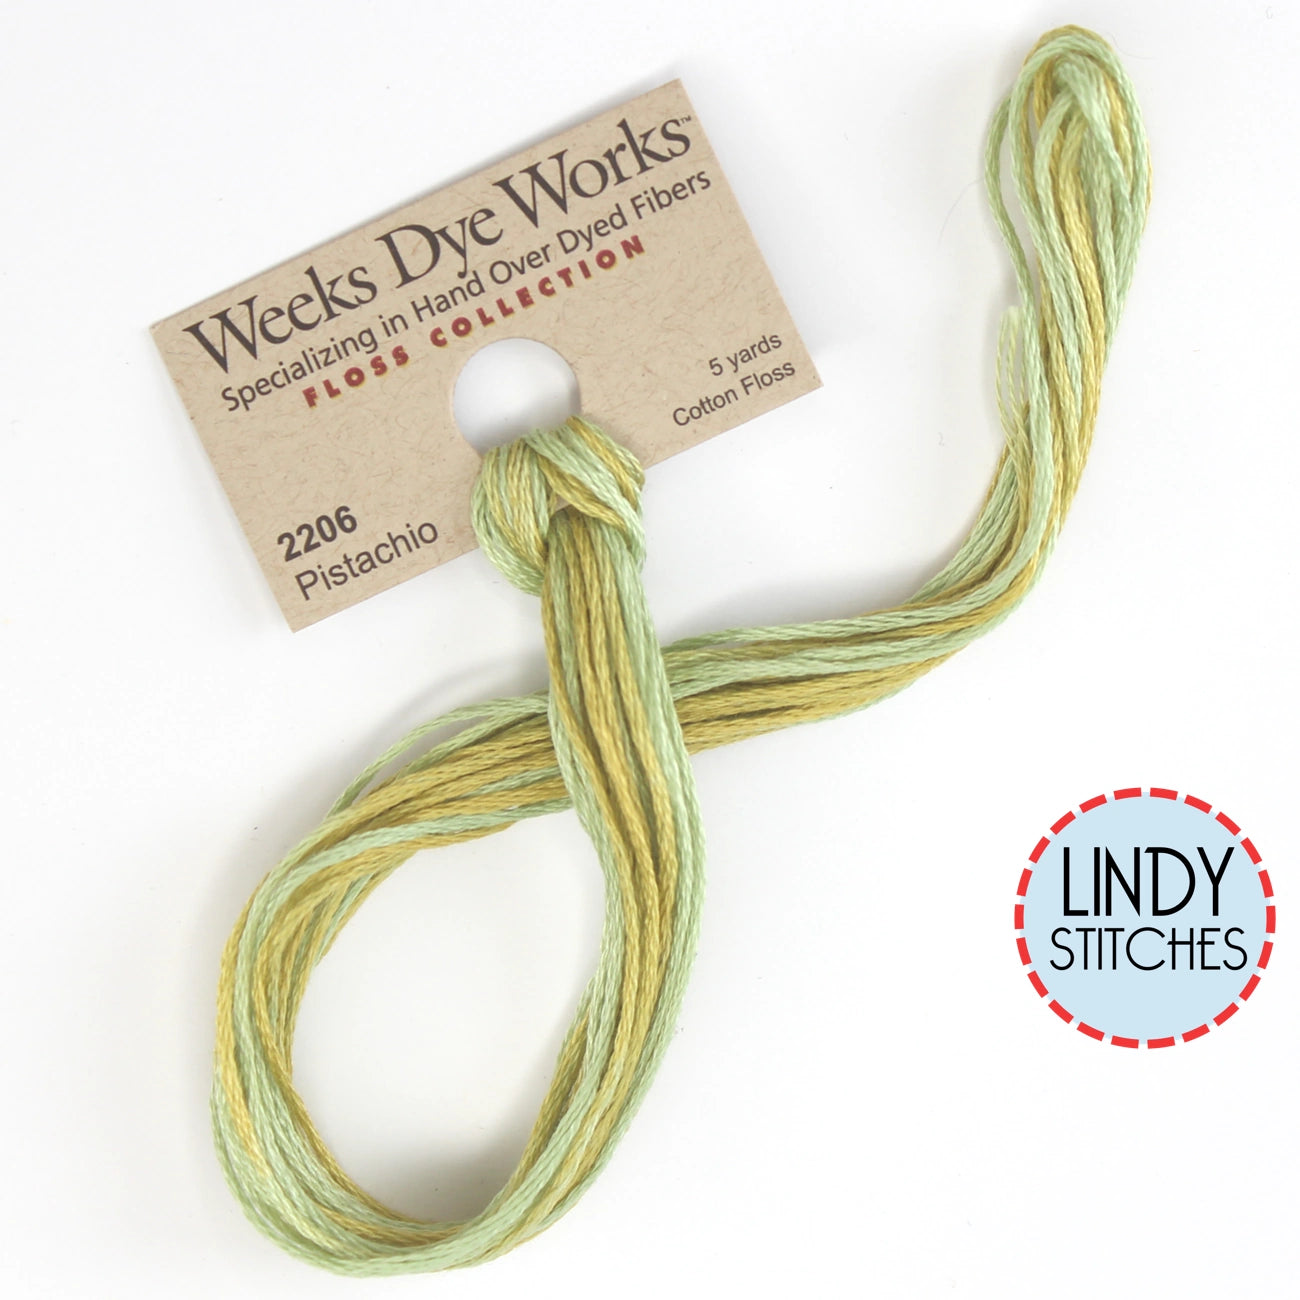 Pistachio Weeks Dye Works Floss Hand Dyed Cotton Skein 2206